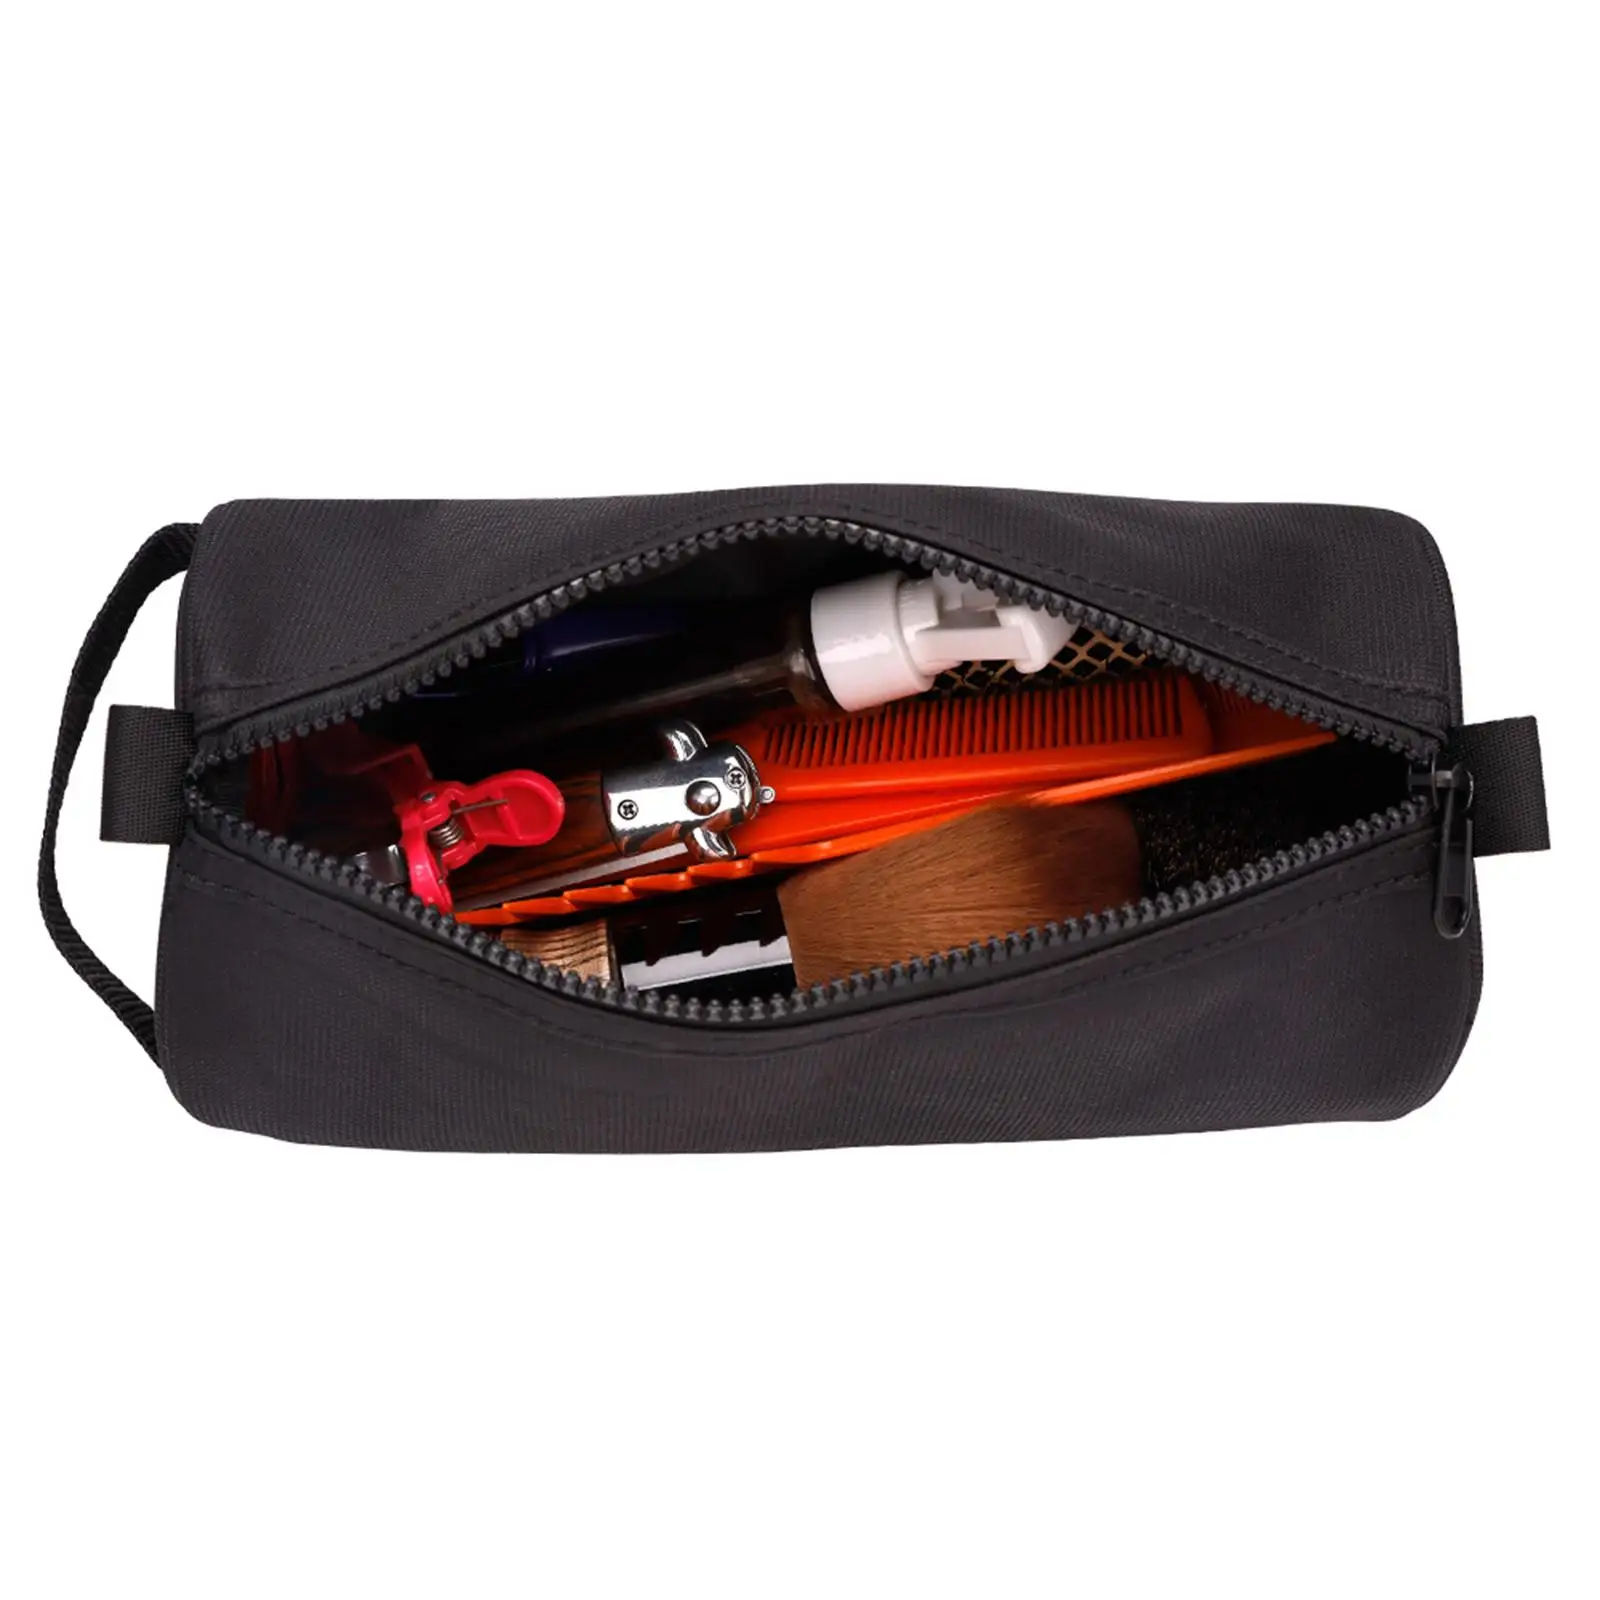 Hairdressing Tools Bag Hair Cutting Tools Carrying Bag Barber Clippers Supplies for Makeup